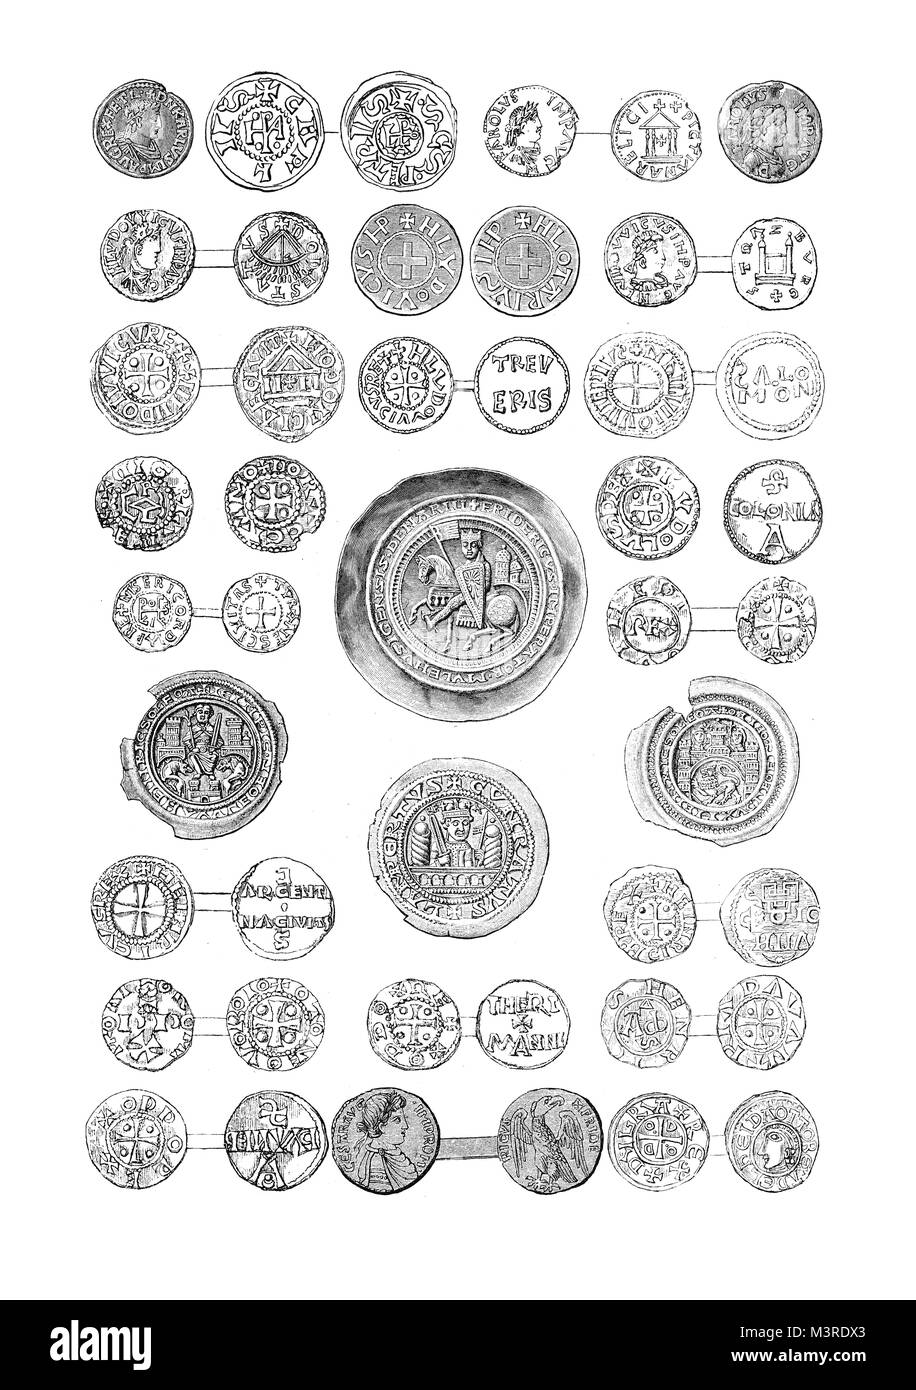 Vintage engraving of medieval coins of German kings and emperors Stock Photo